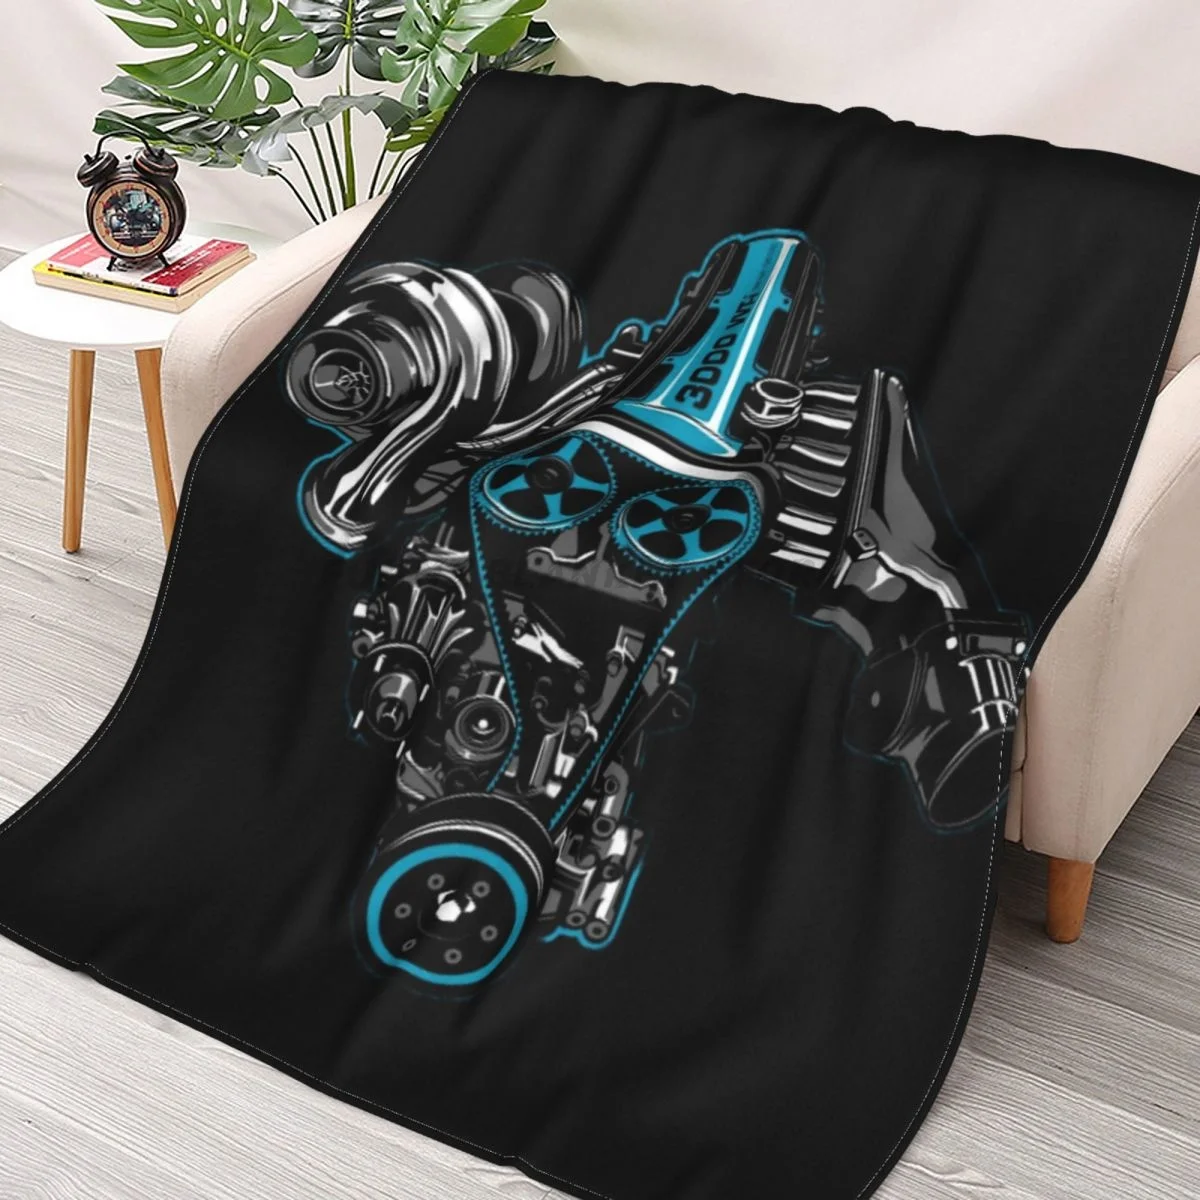 

Jdm 2jz GTE Throws Blankets Collage Flannel Ultra-Soft Warm picnic blanket bedspread on the bed